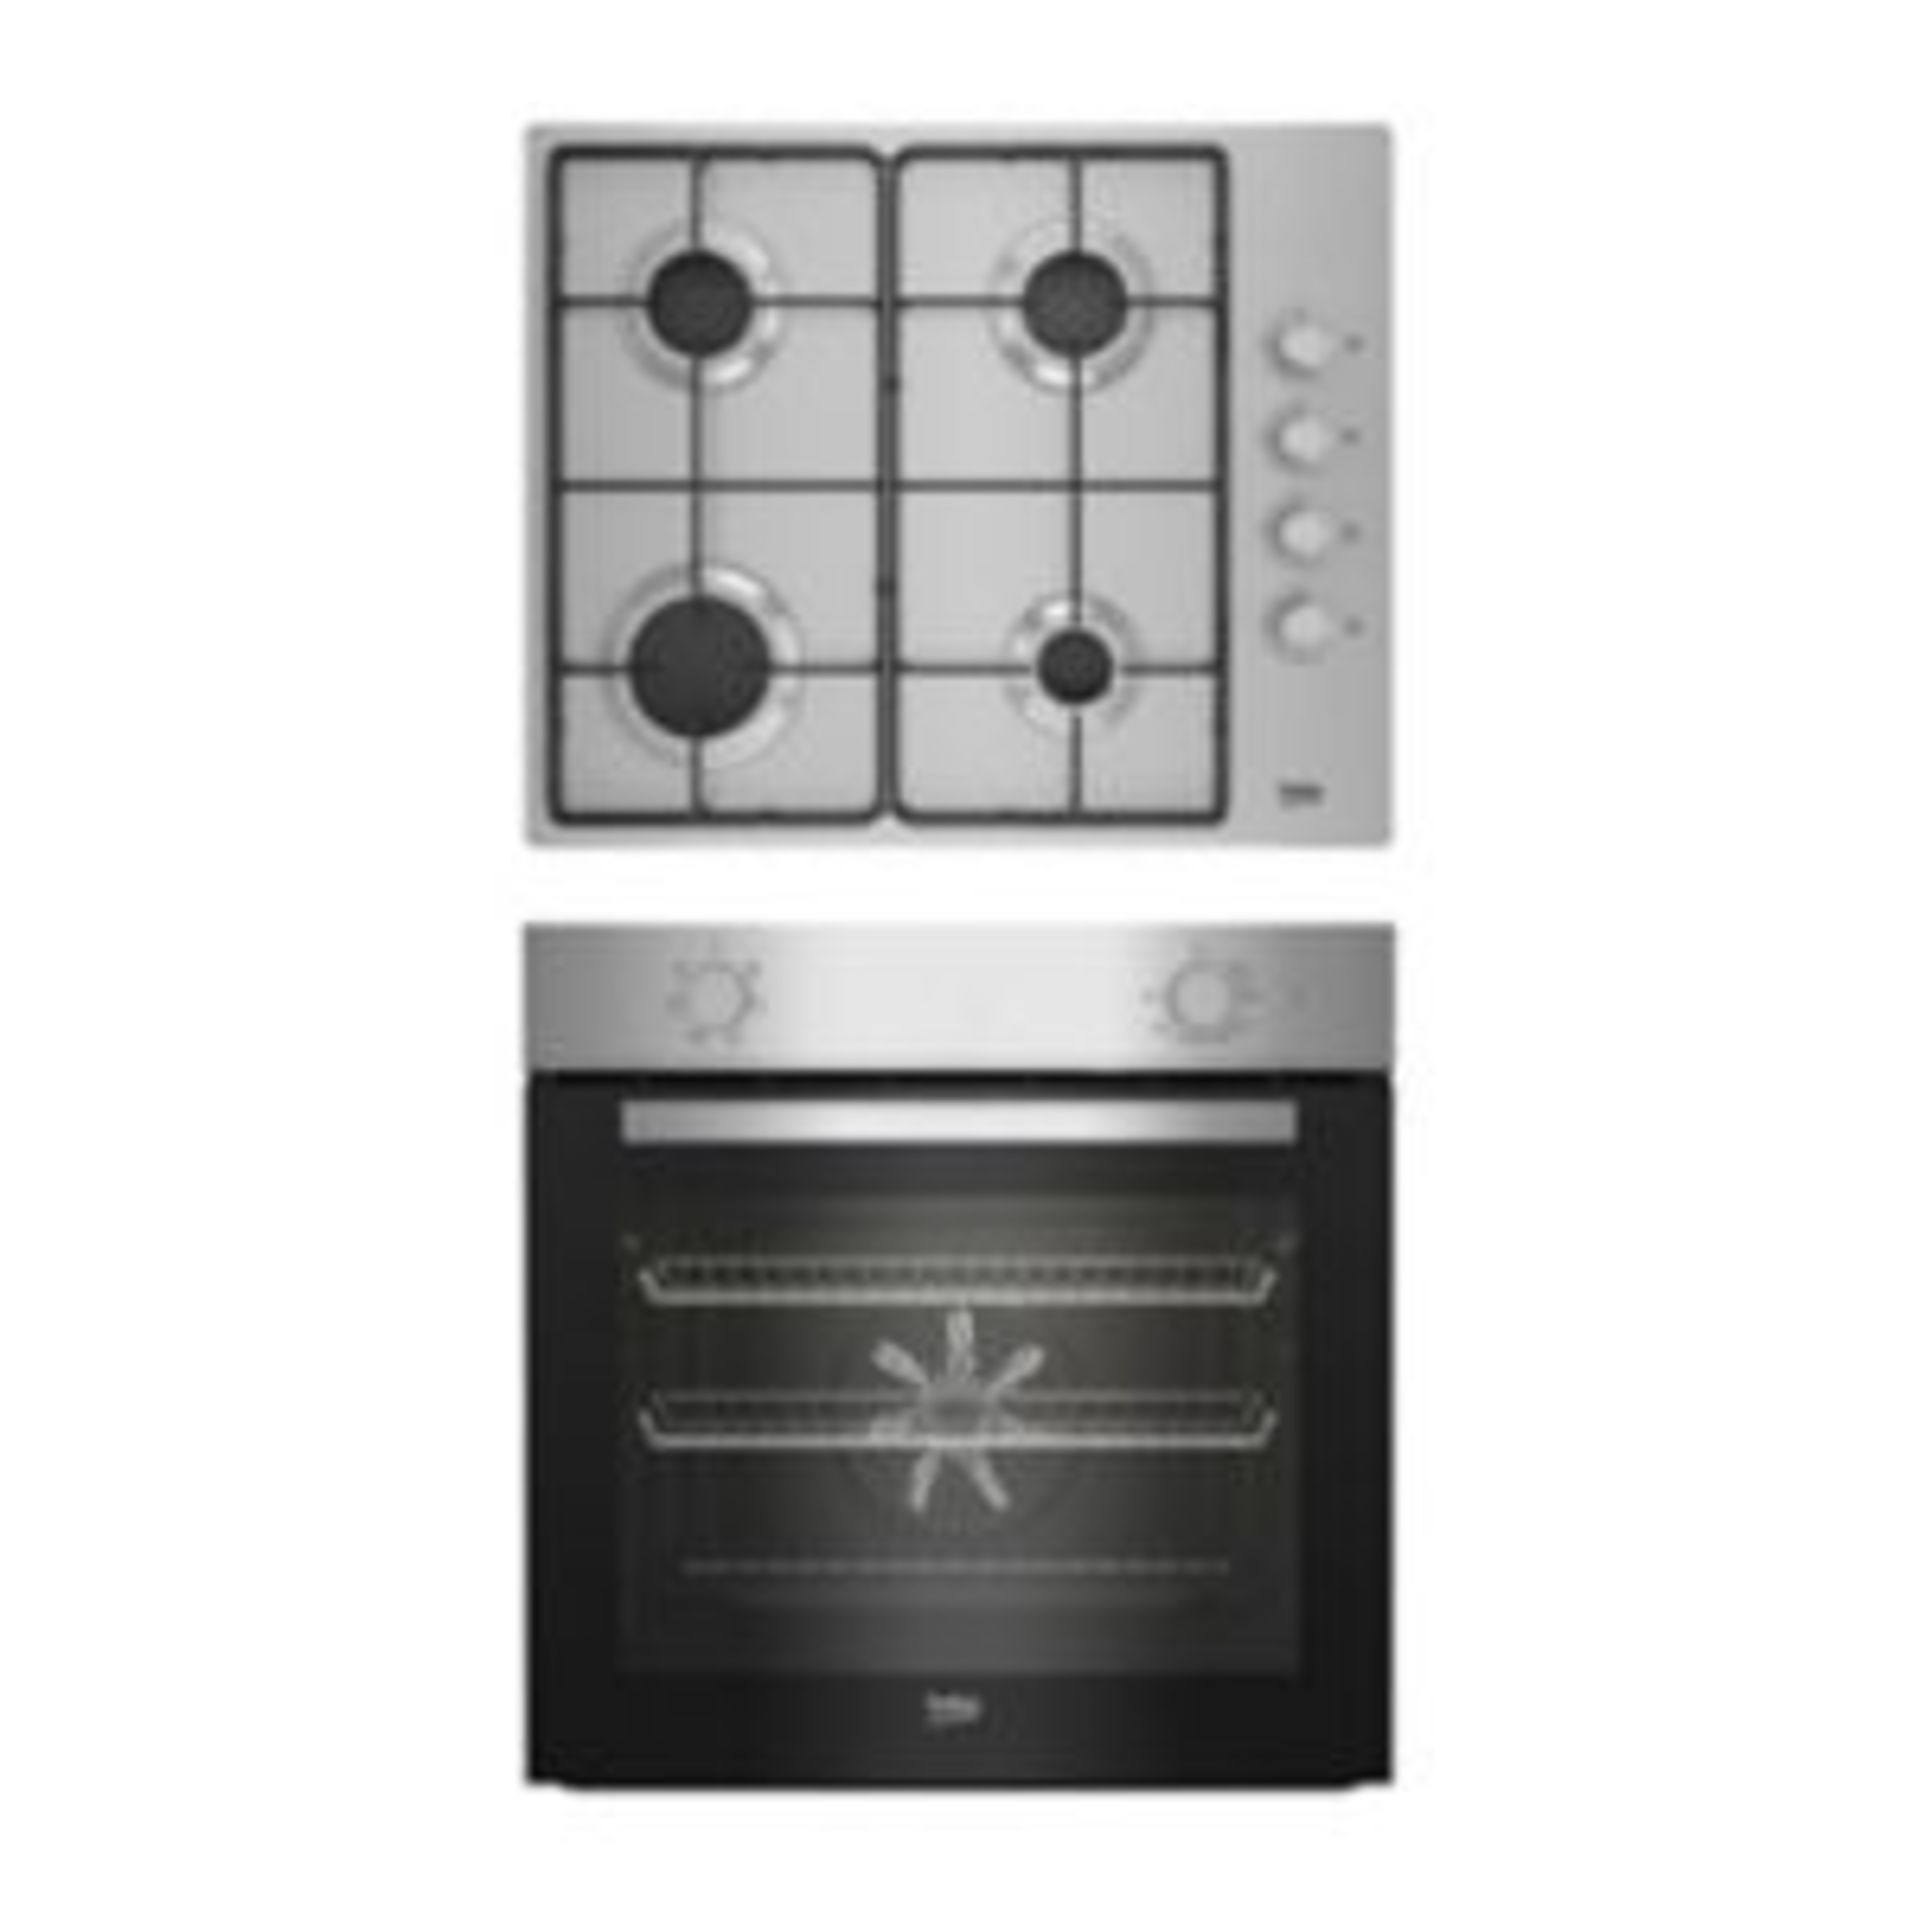 Built-in Multifunction Oven - Stainless Steel - ER40 *Oven only